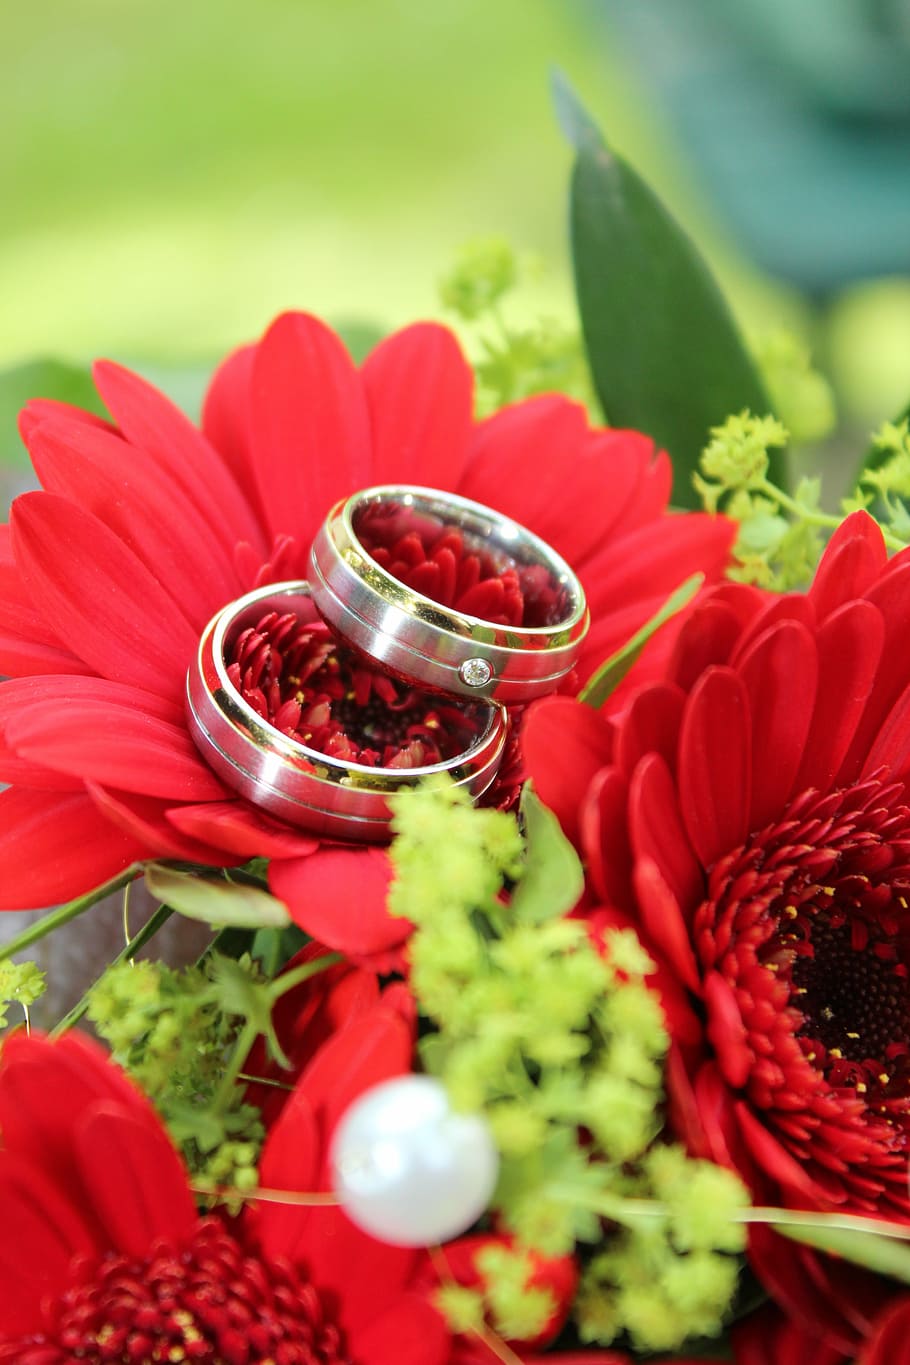 silver-colored bridal band rings on red Gerbera daisy flower, HD wallpaper